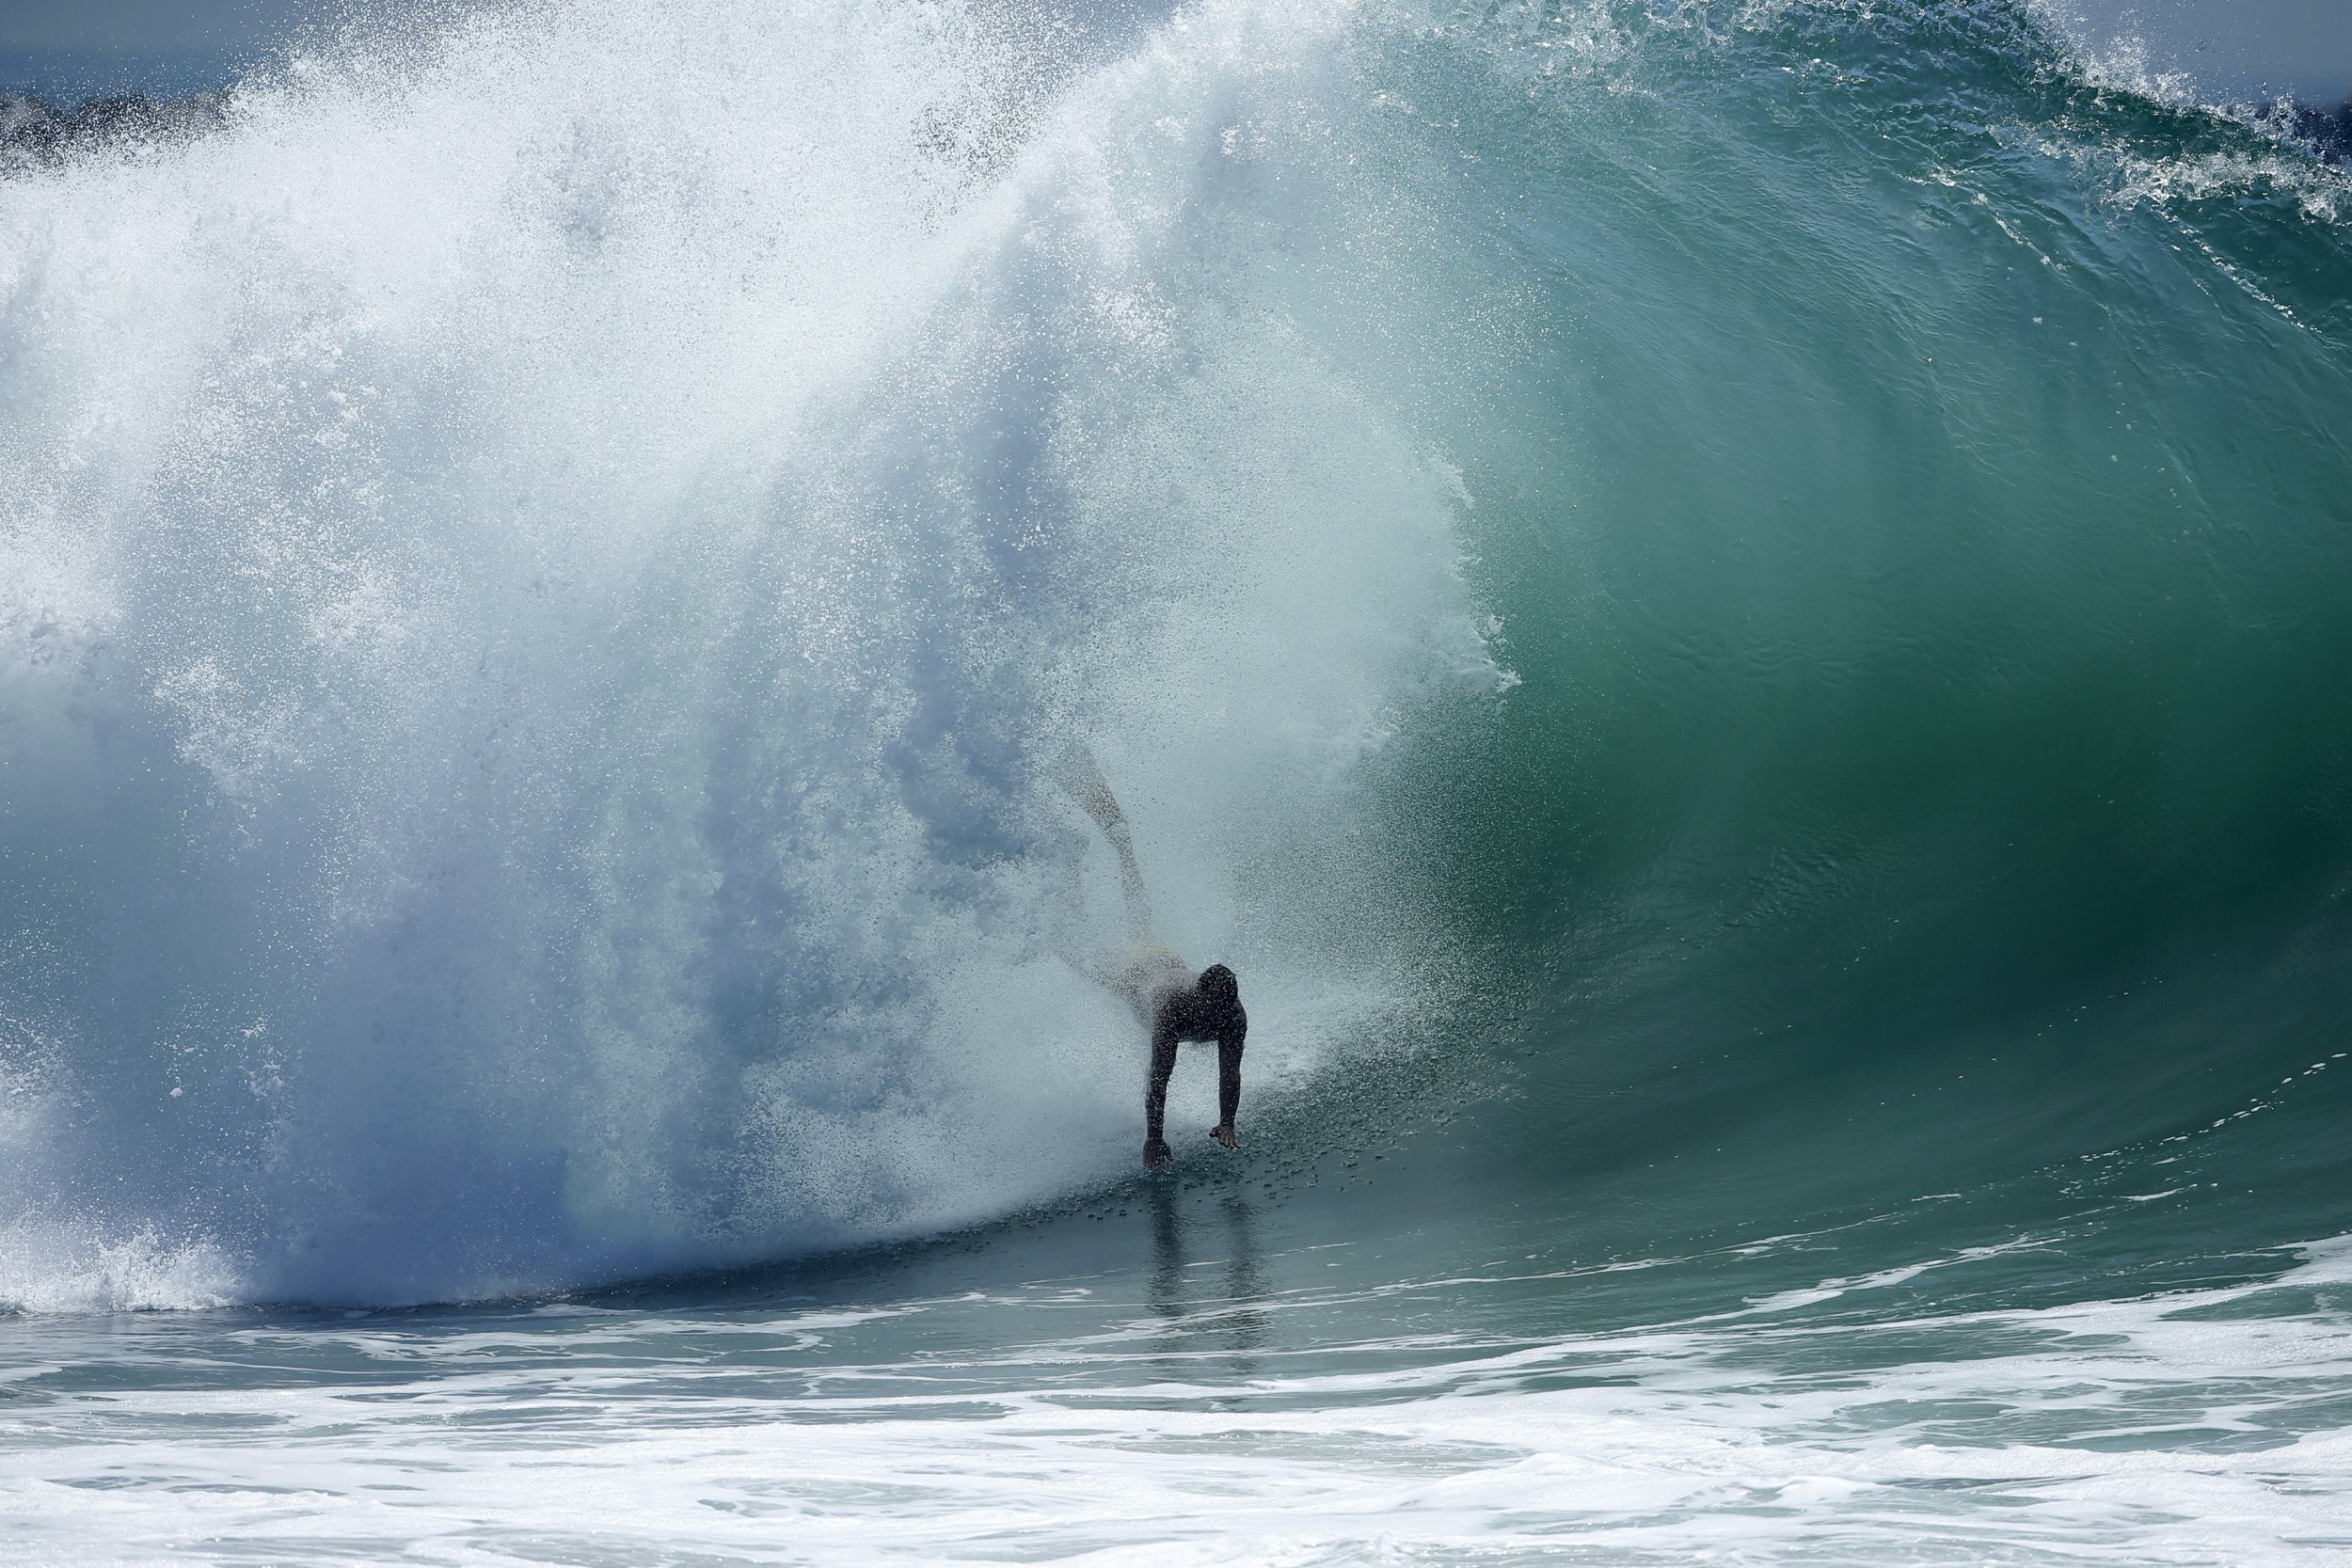 Big swell to bring 15-foot waves to Wedge – Orange County Register